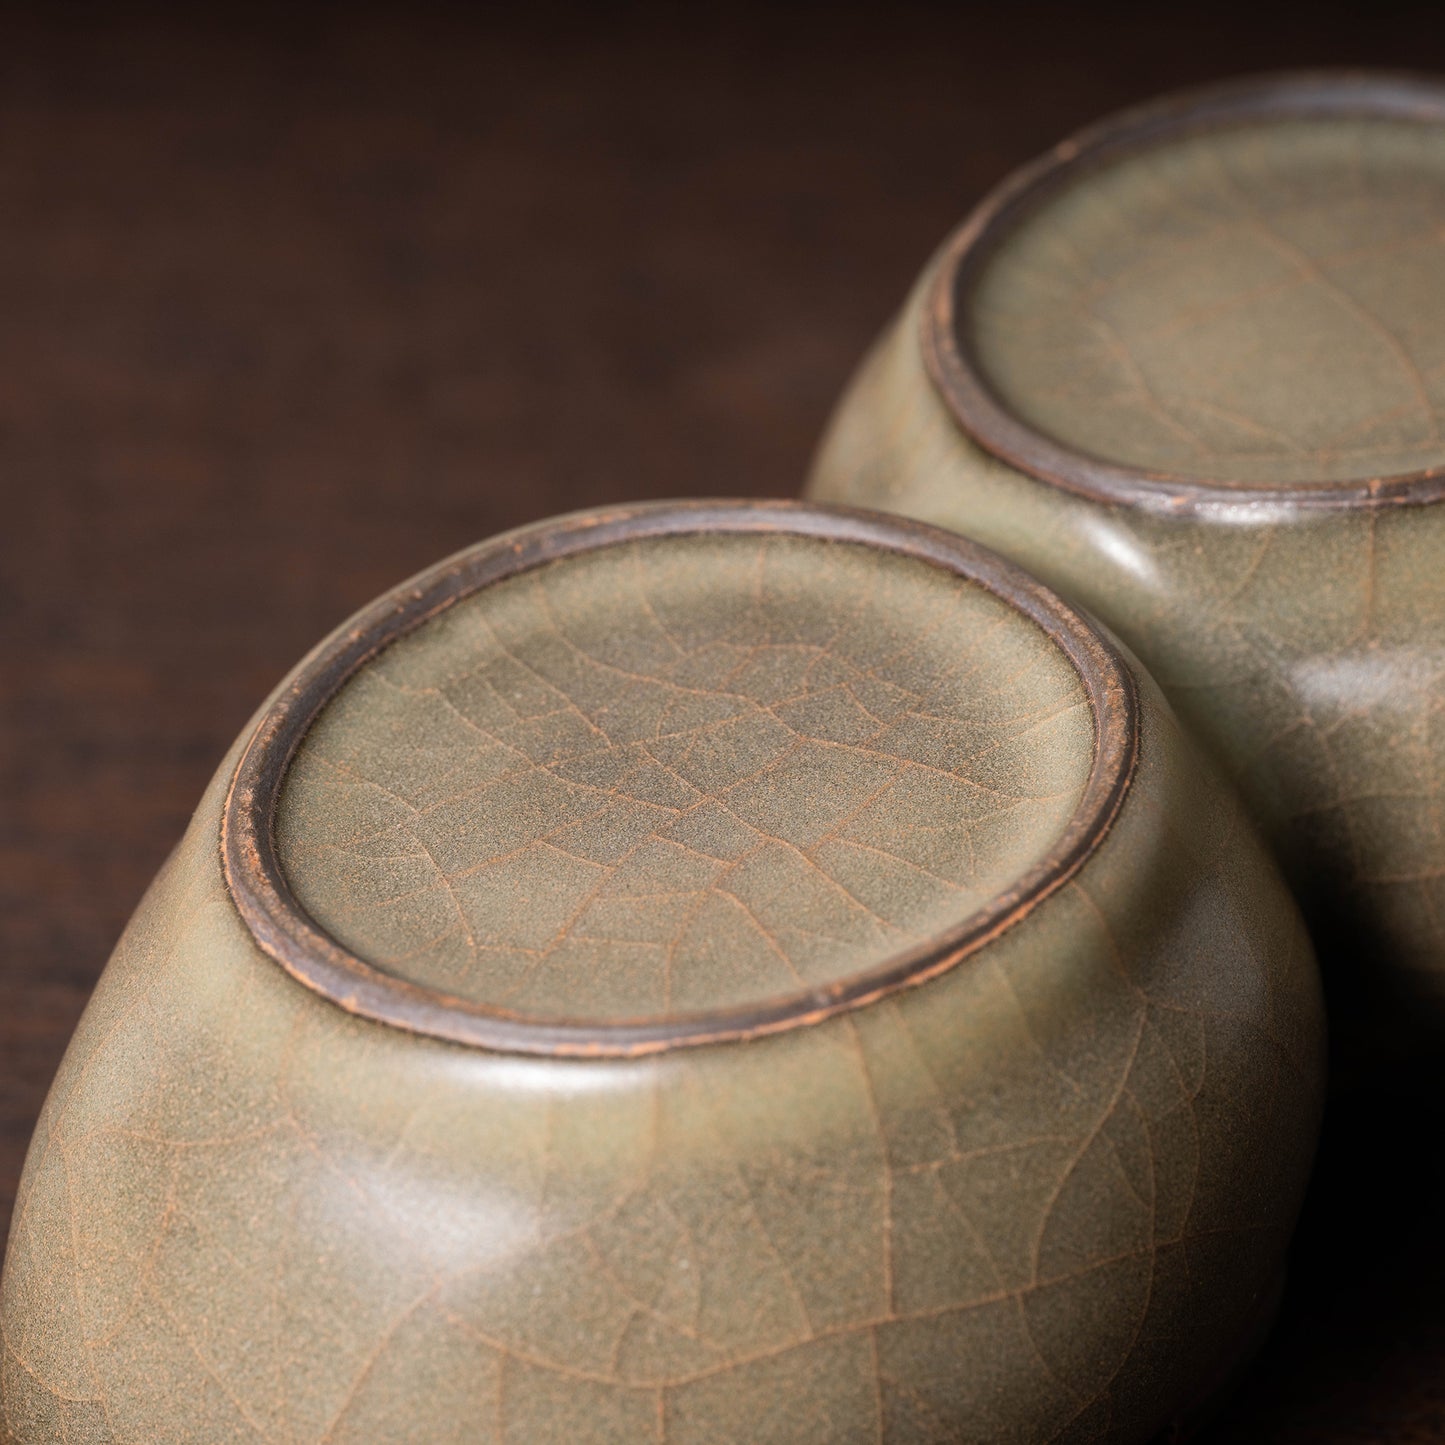 Southern Song Dynasty Guanware Rice-colored Celadon Washer with Peach Shaped